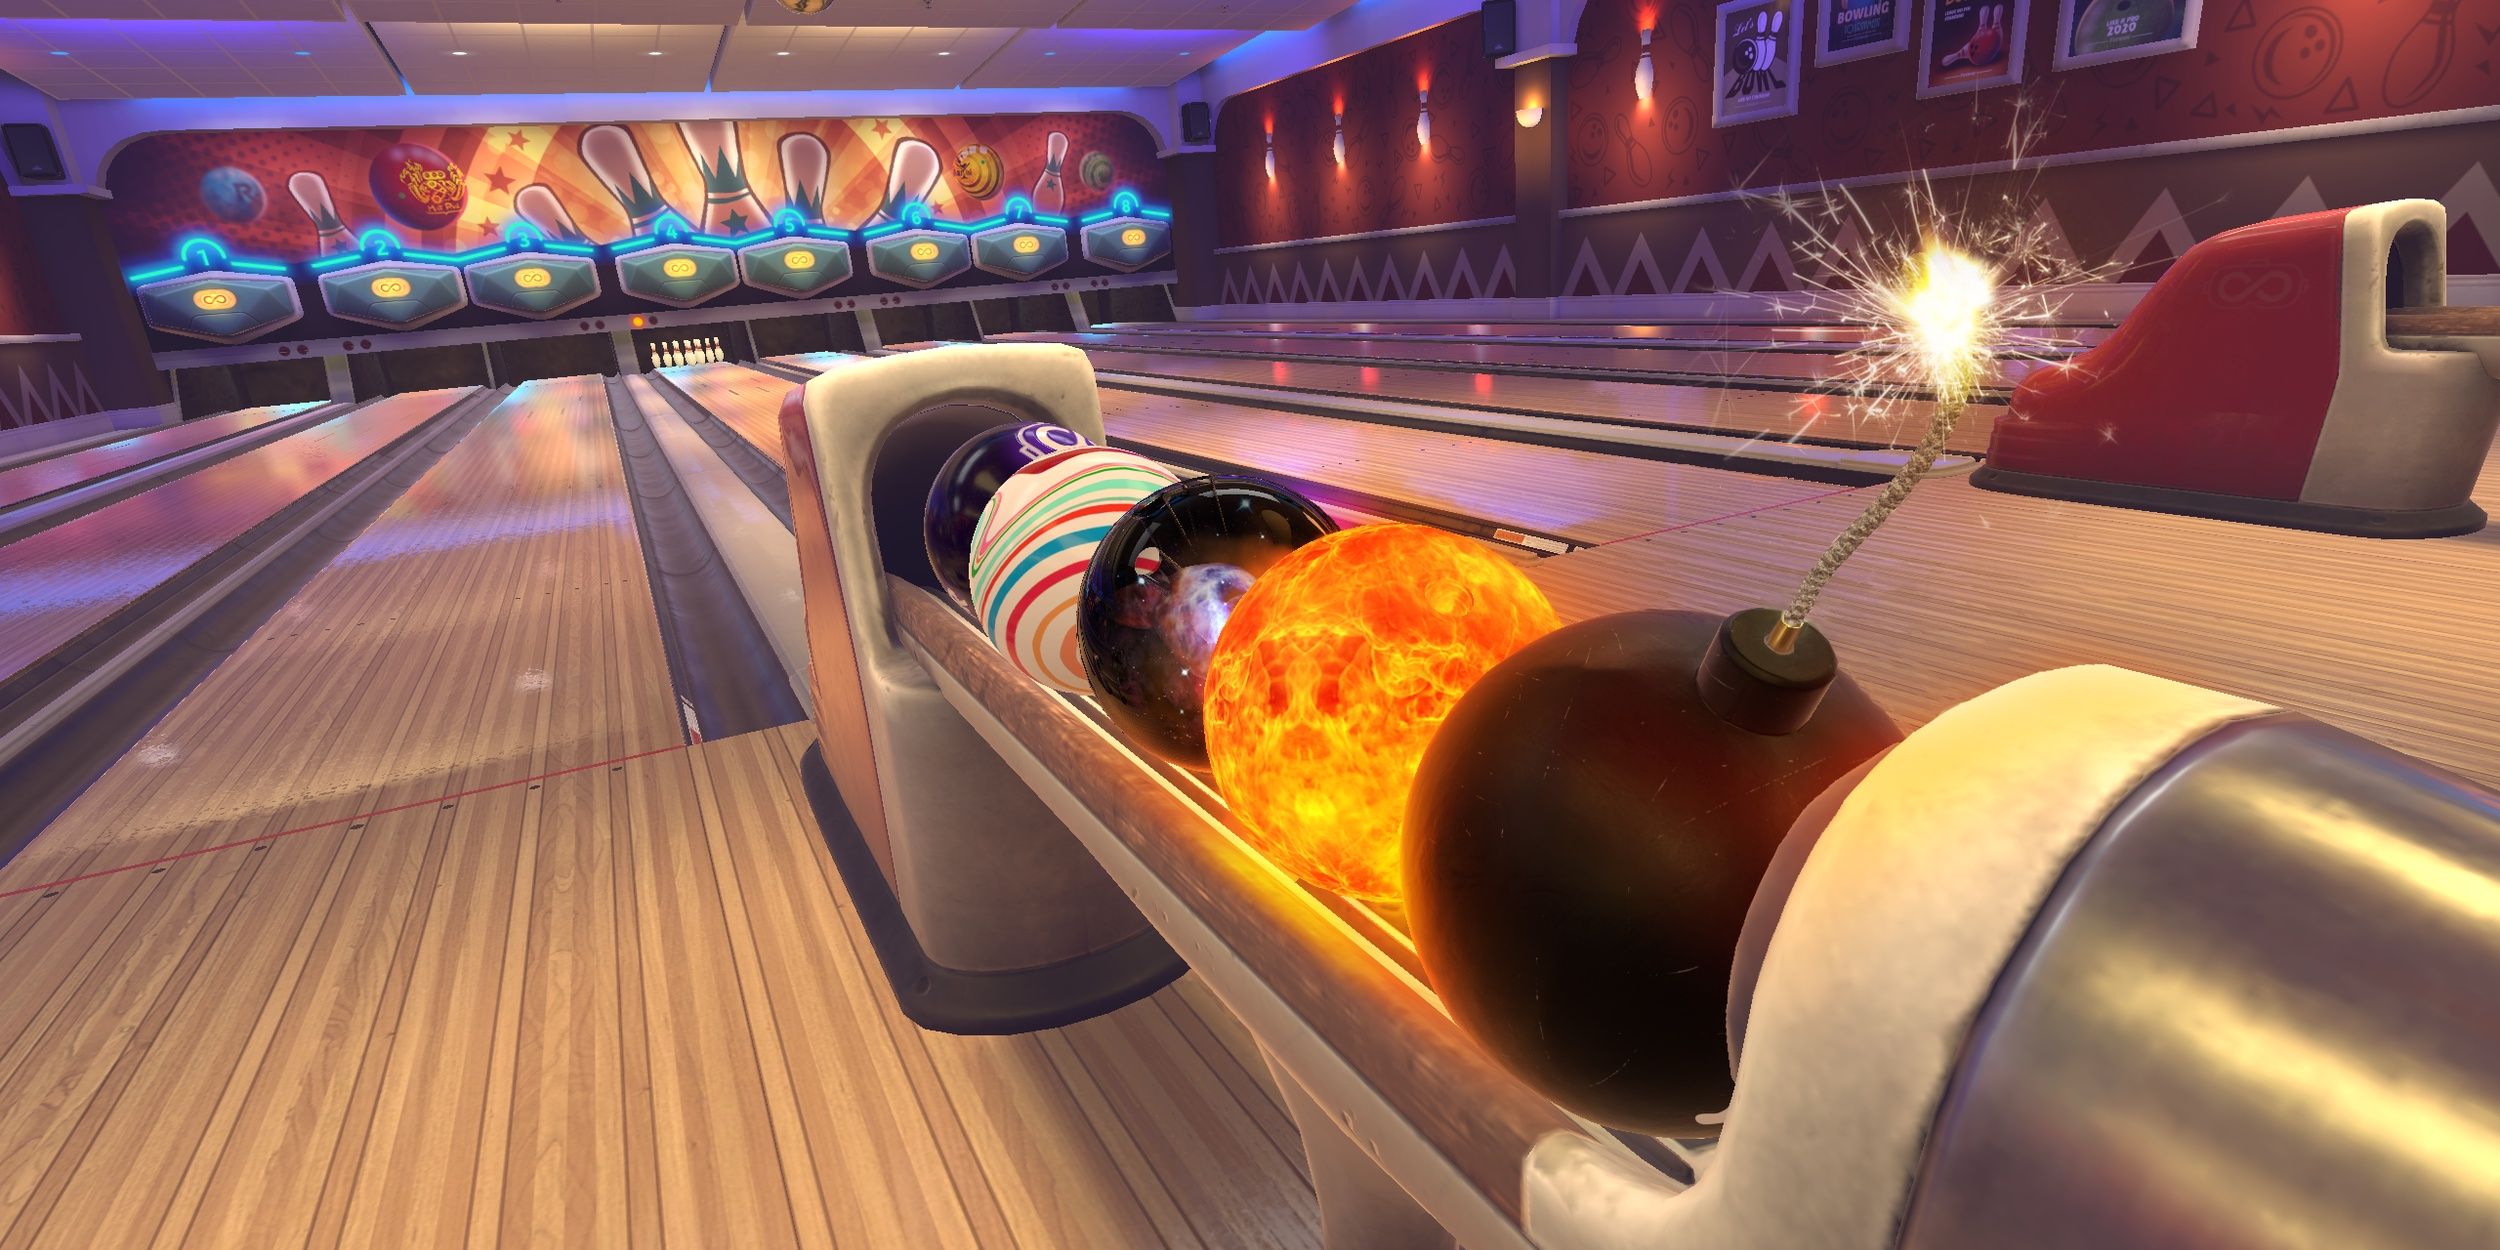 Bowling in ForeVR Bowl 